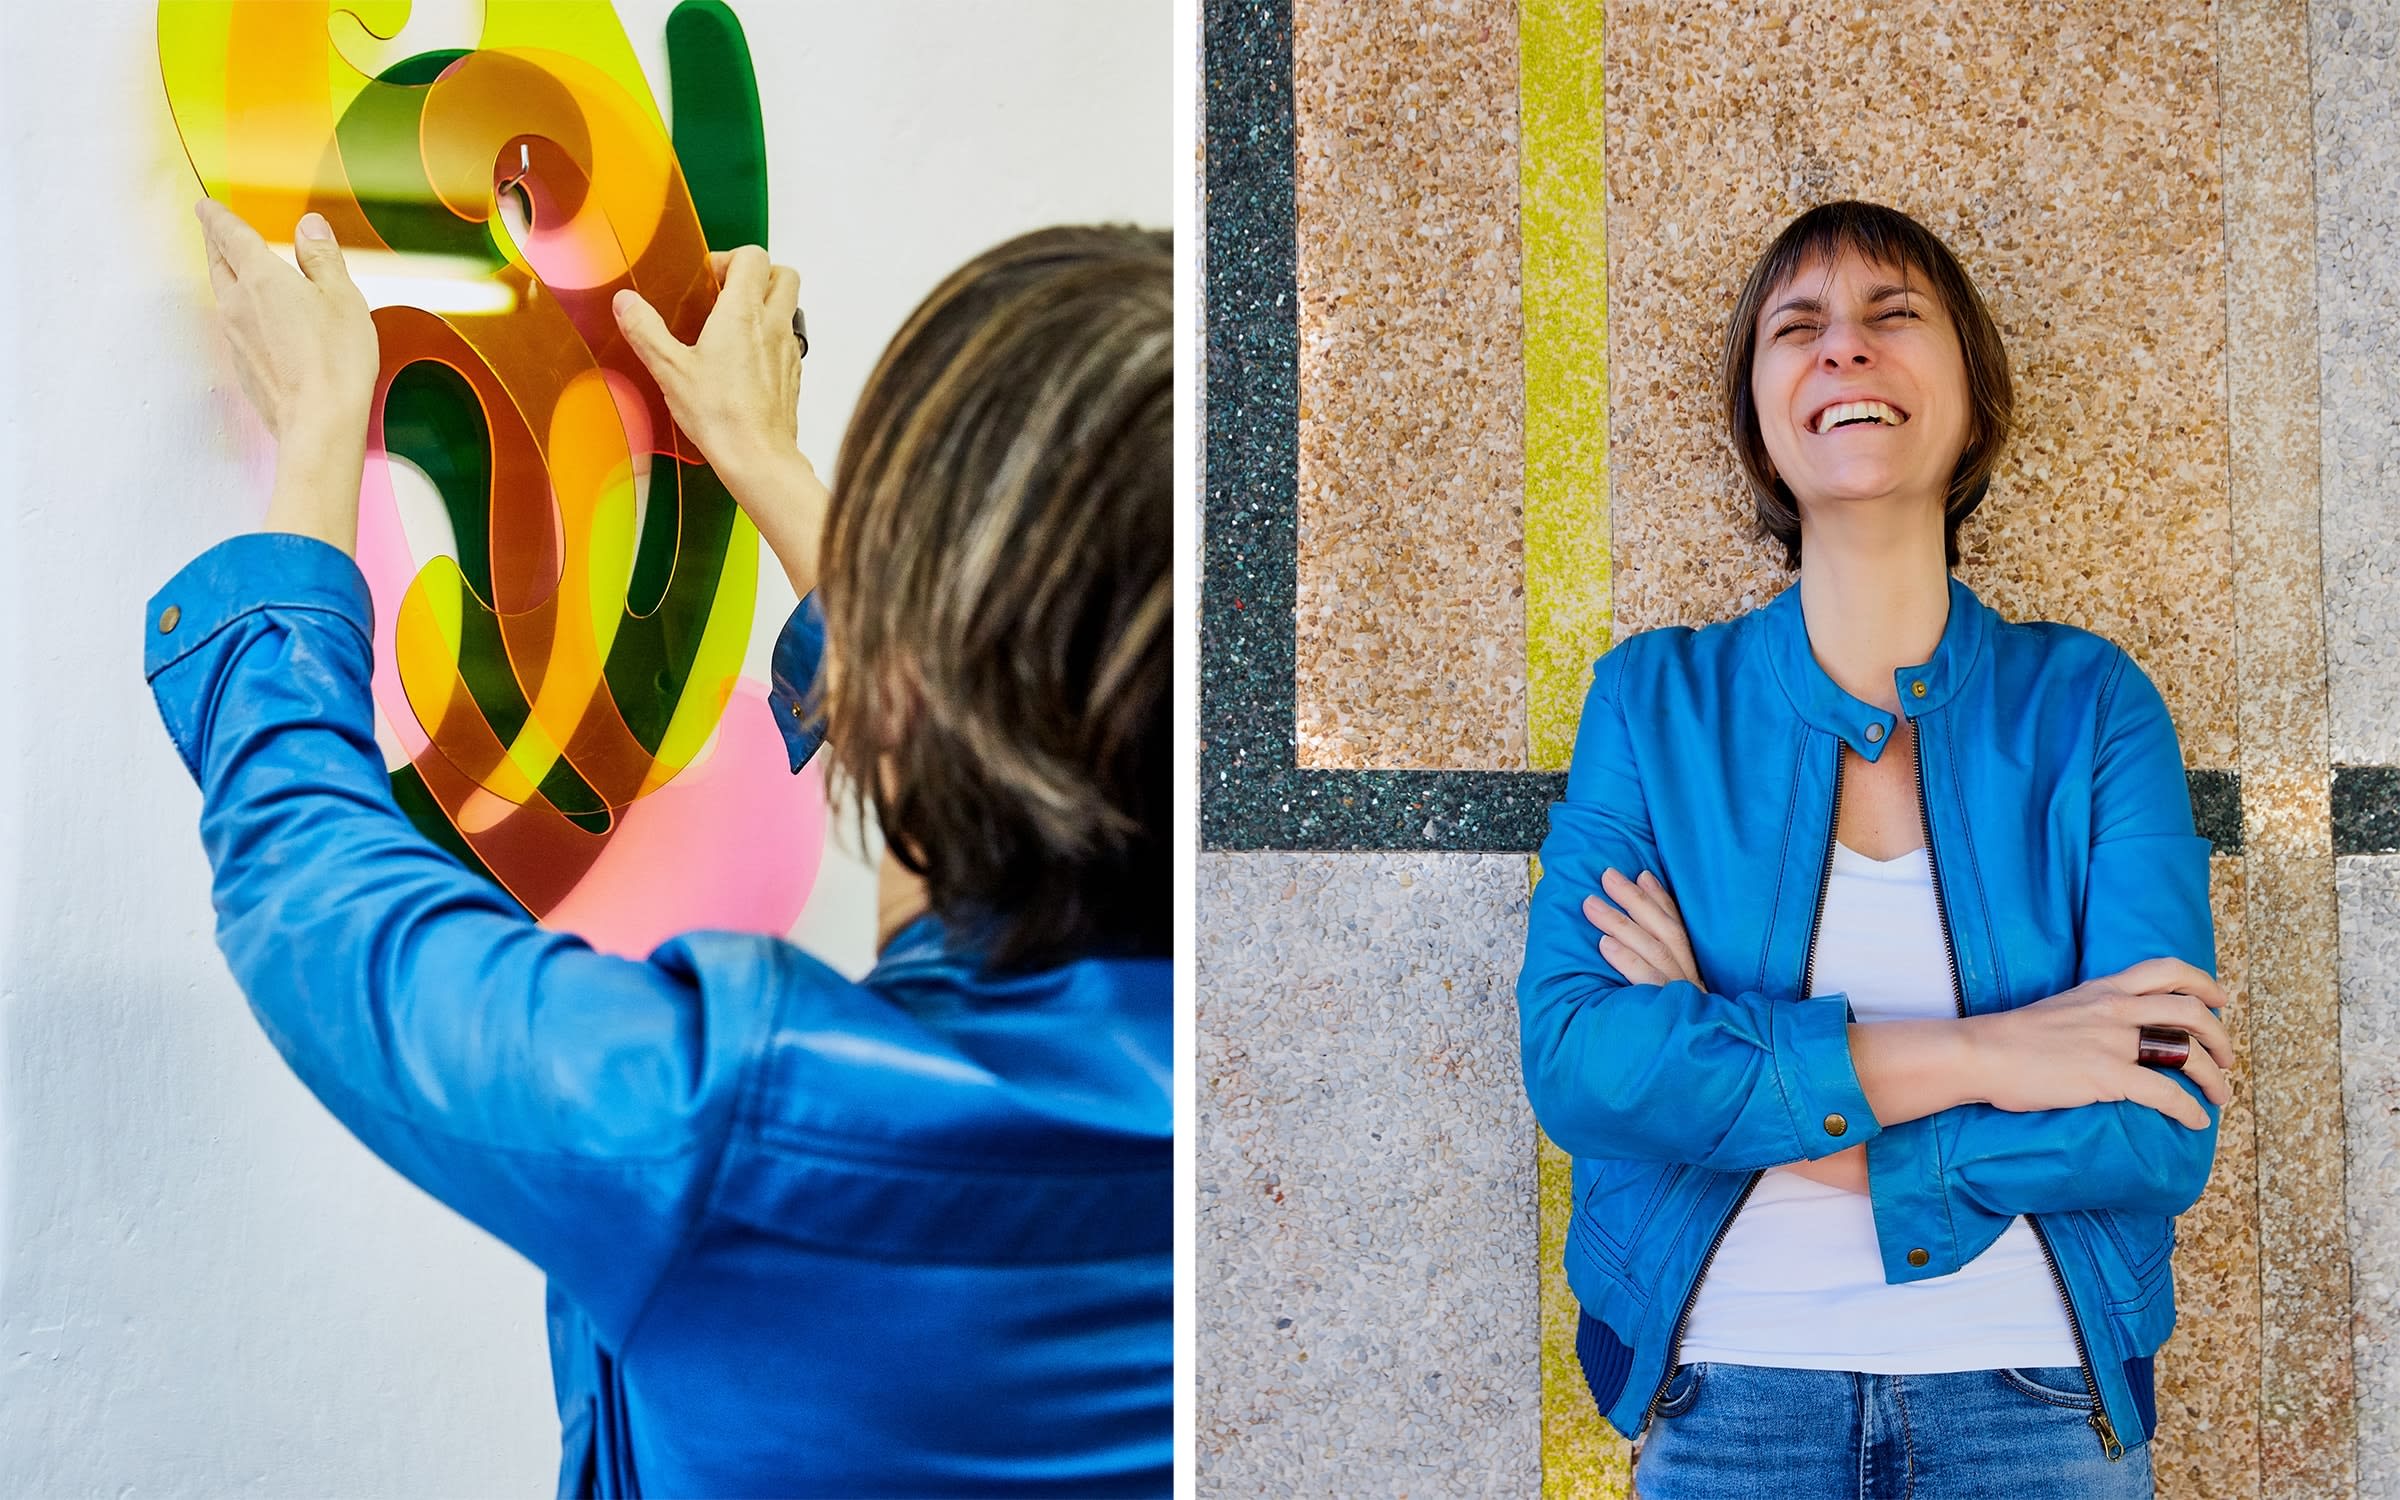 Left: Sinclair rearranging a work in progress. Right: Sinclair at her studio. Photos by Mani Gatto.